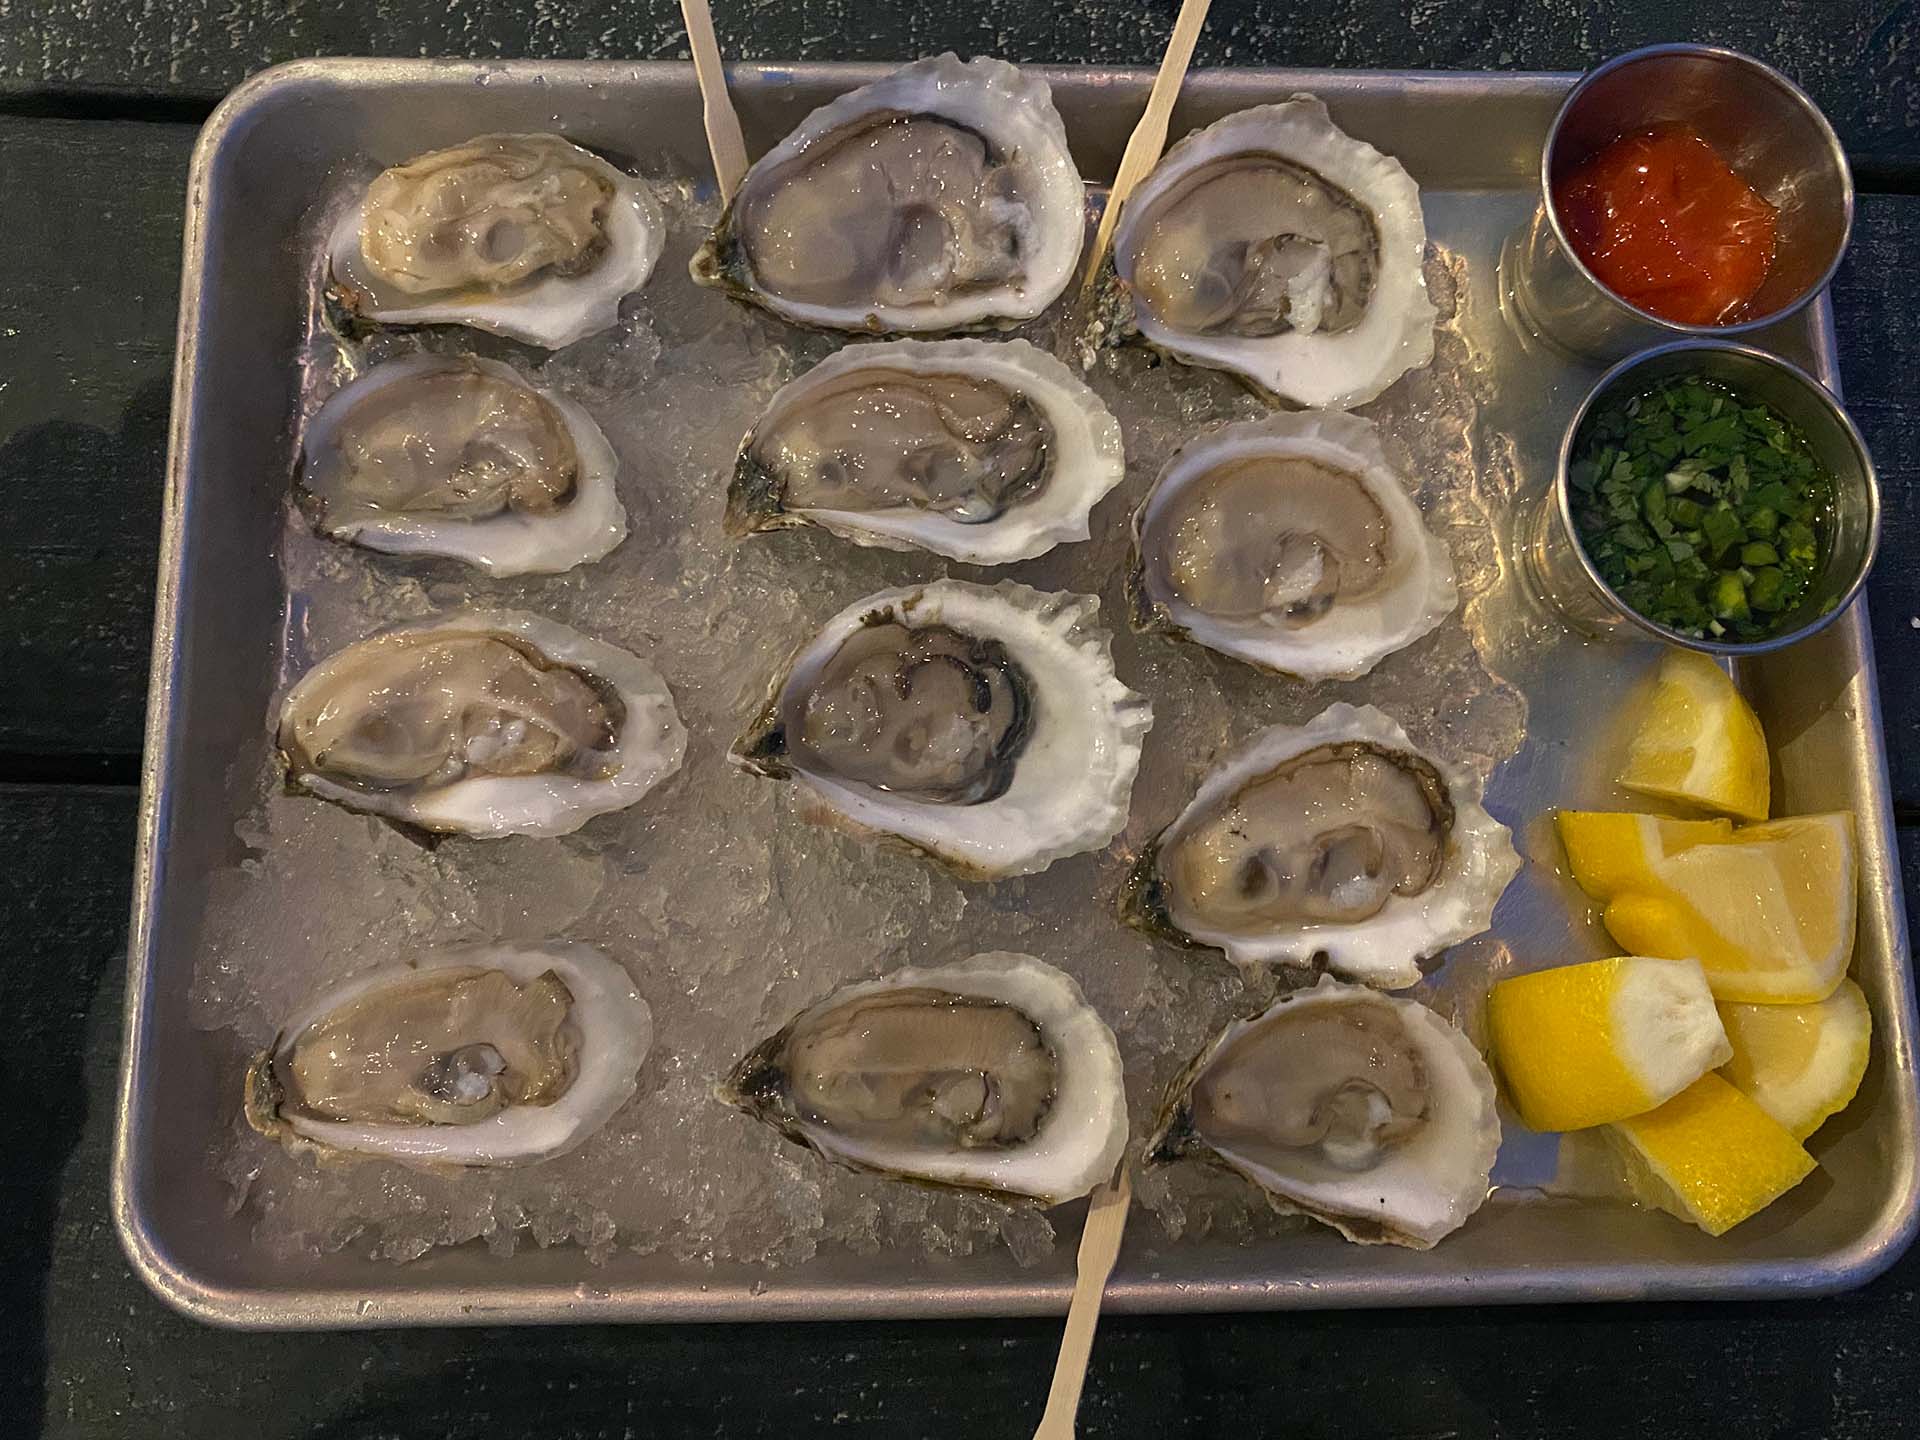 A tray of oysters on ice.